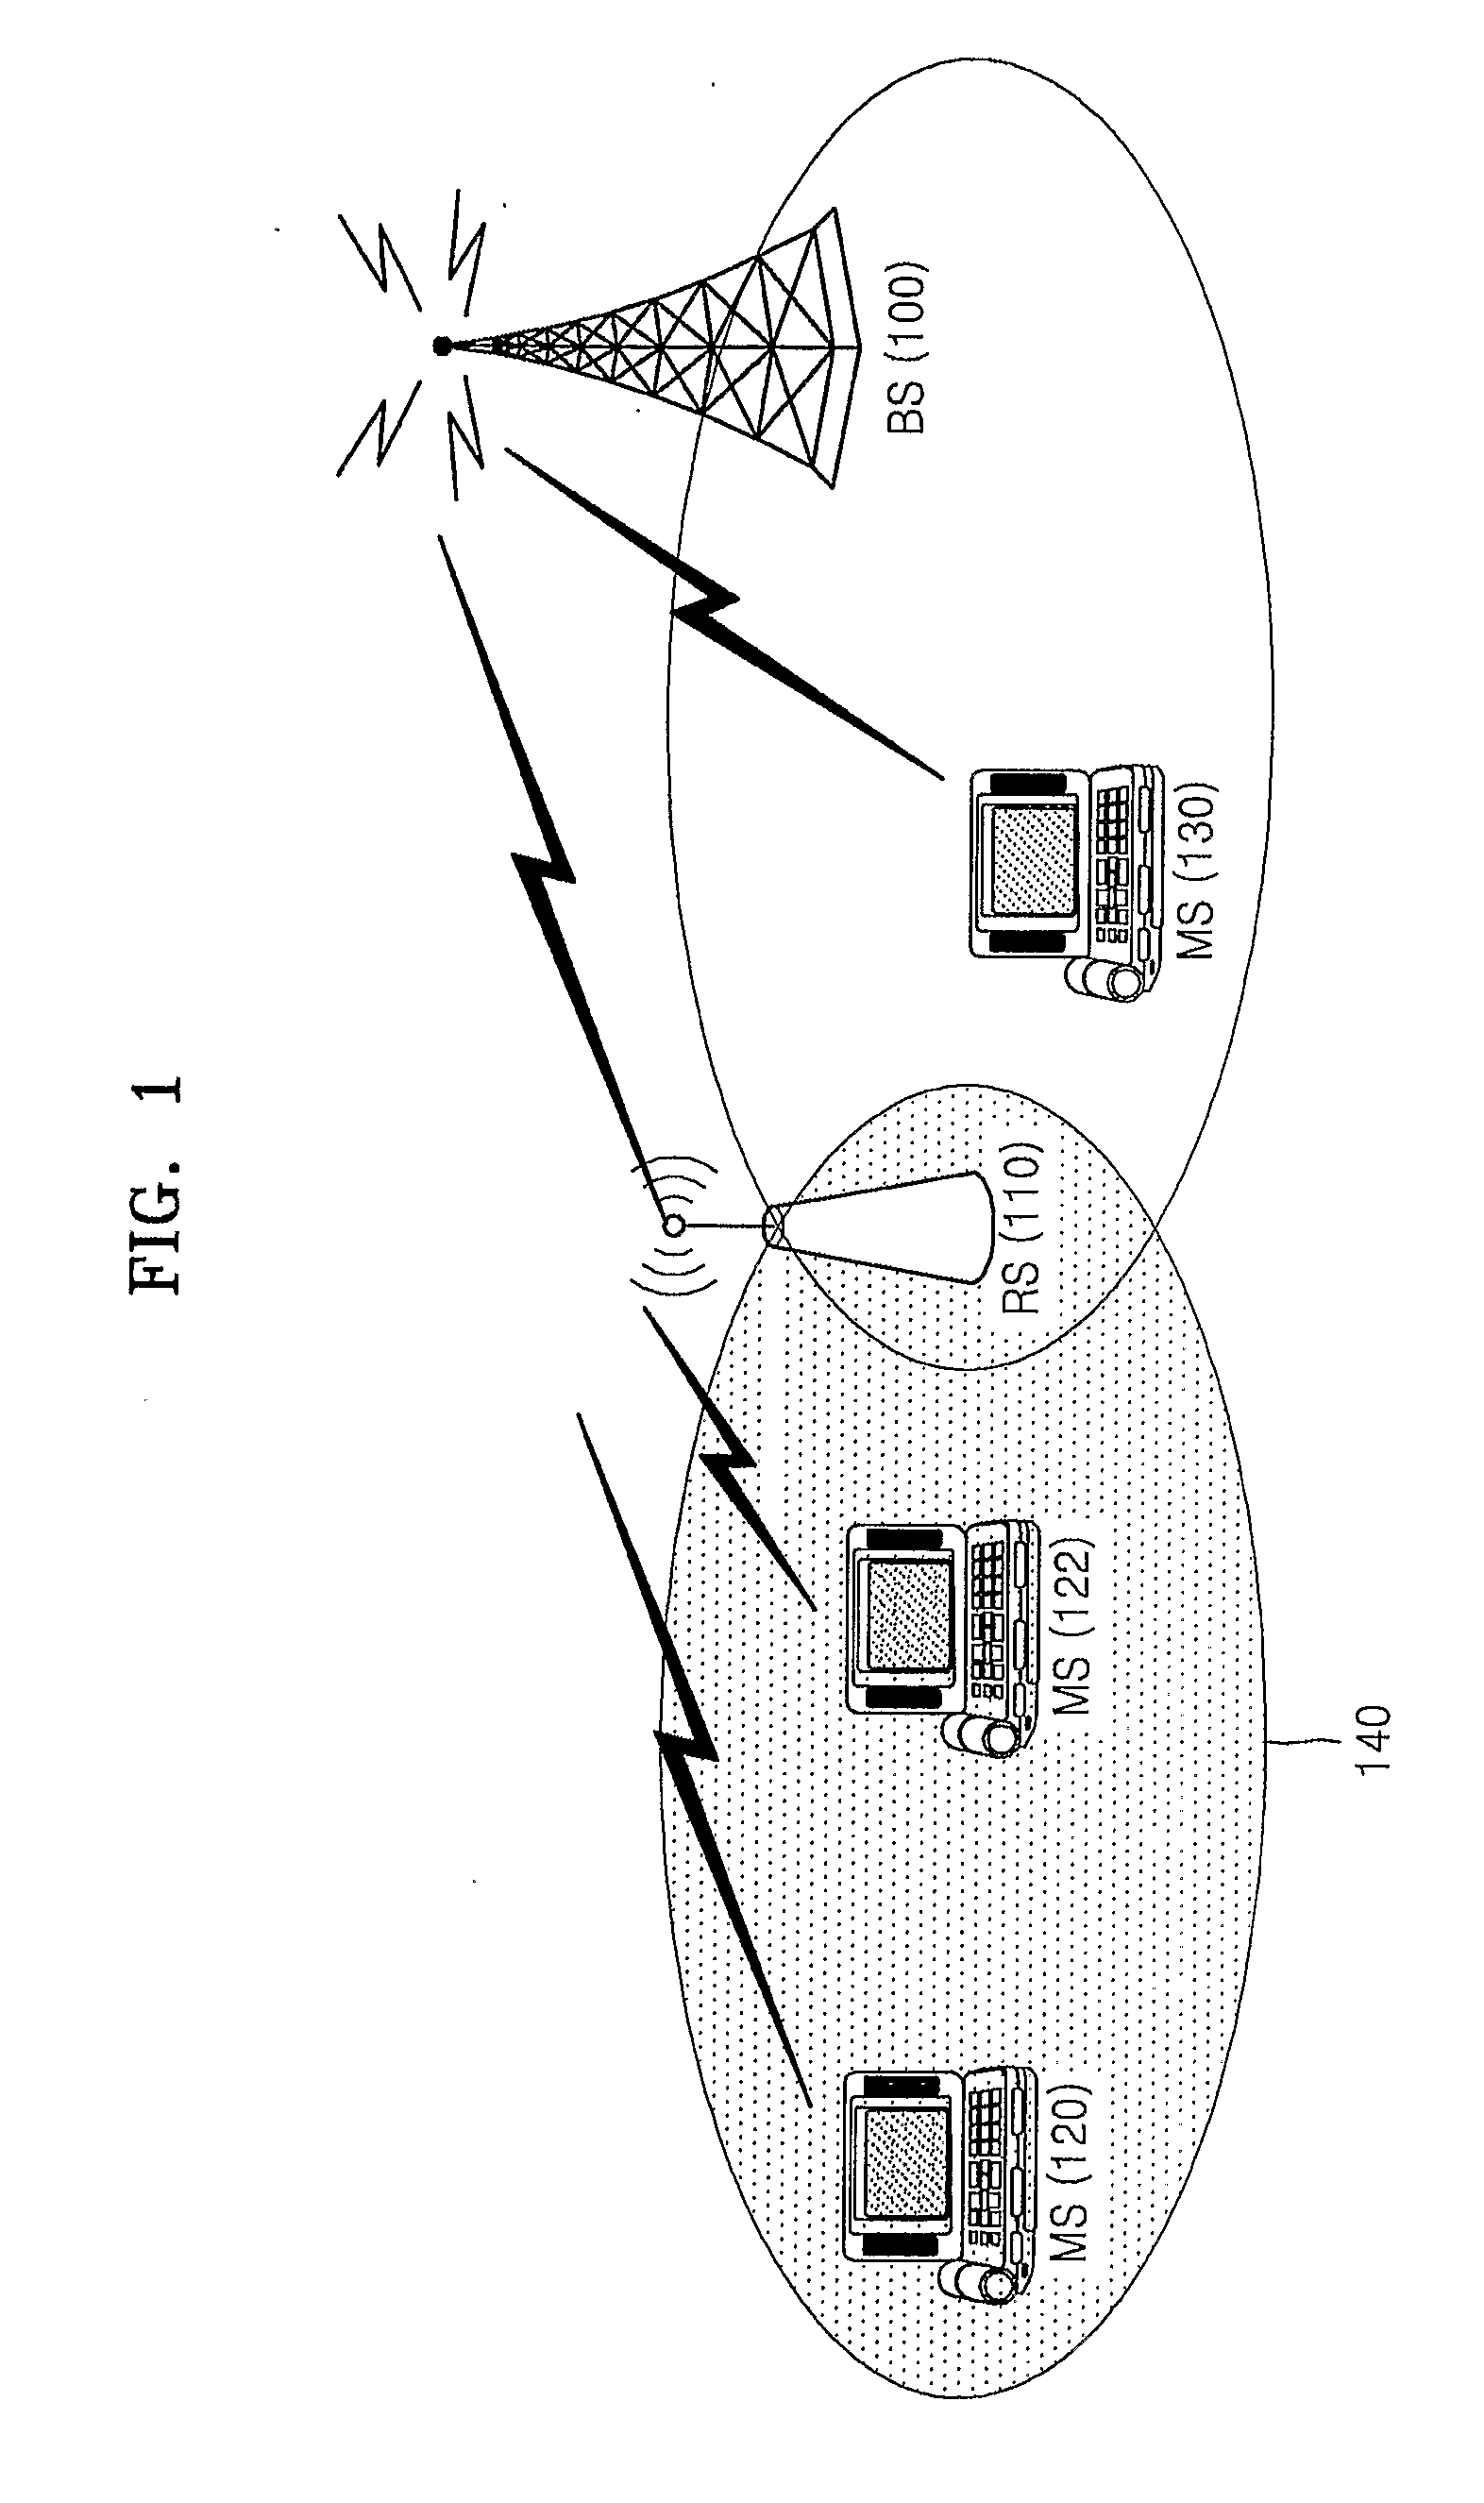 Method for configurating a feedback region in wireless communication system